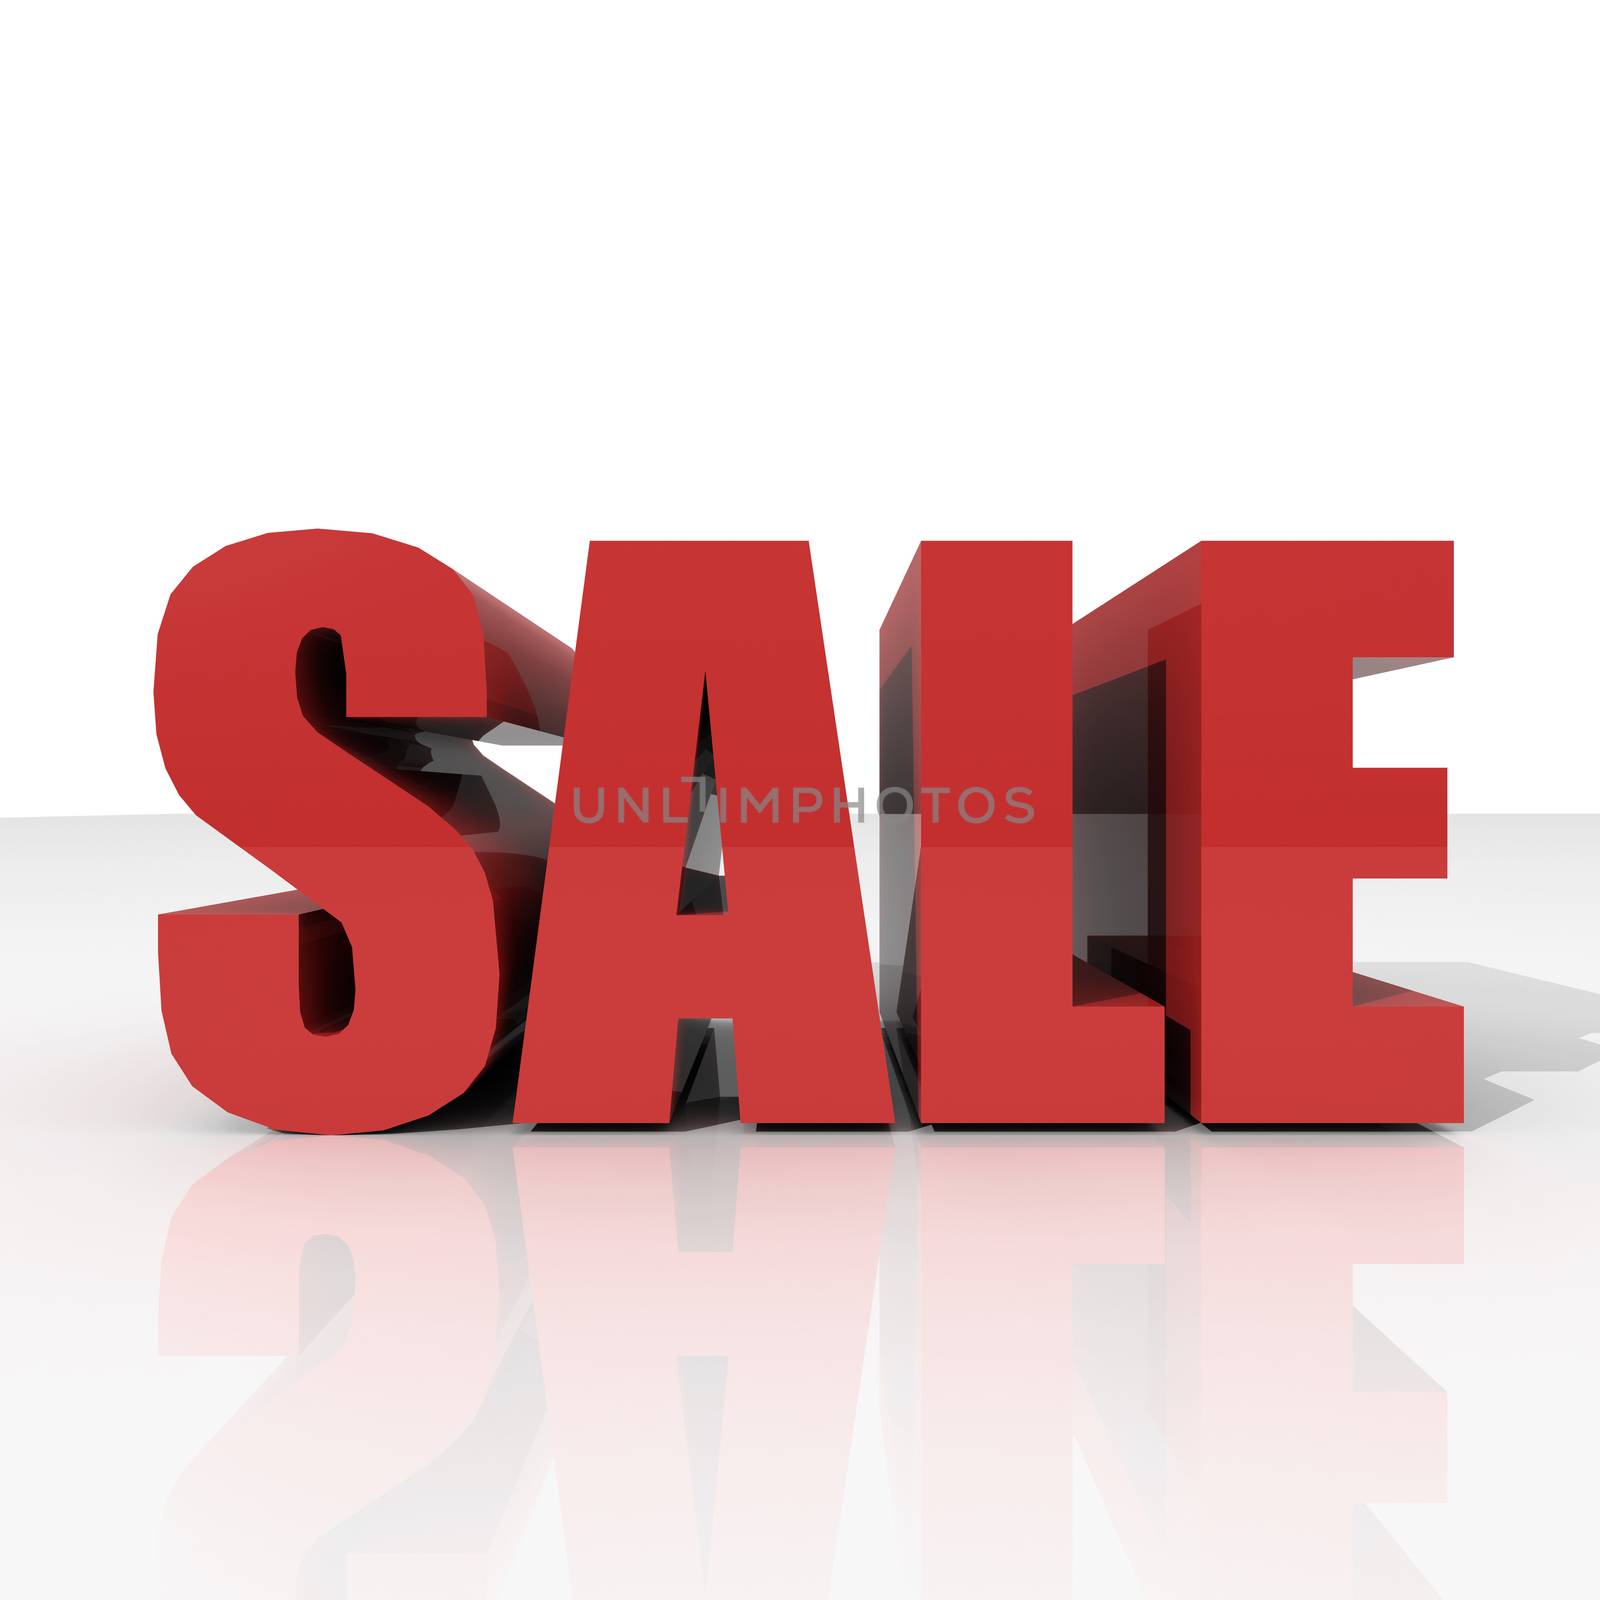 3d red text SALE on white background